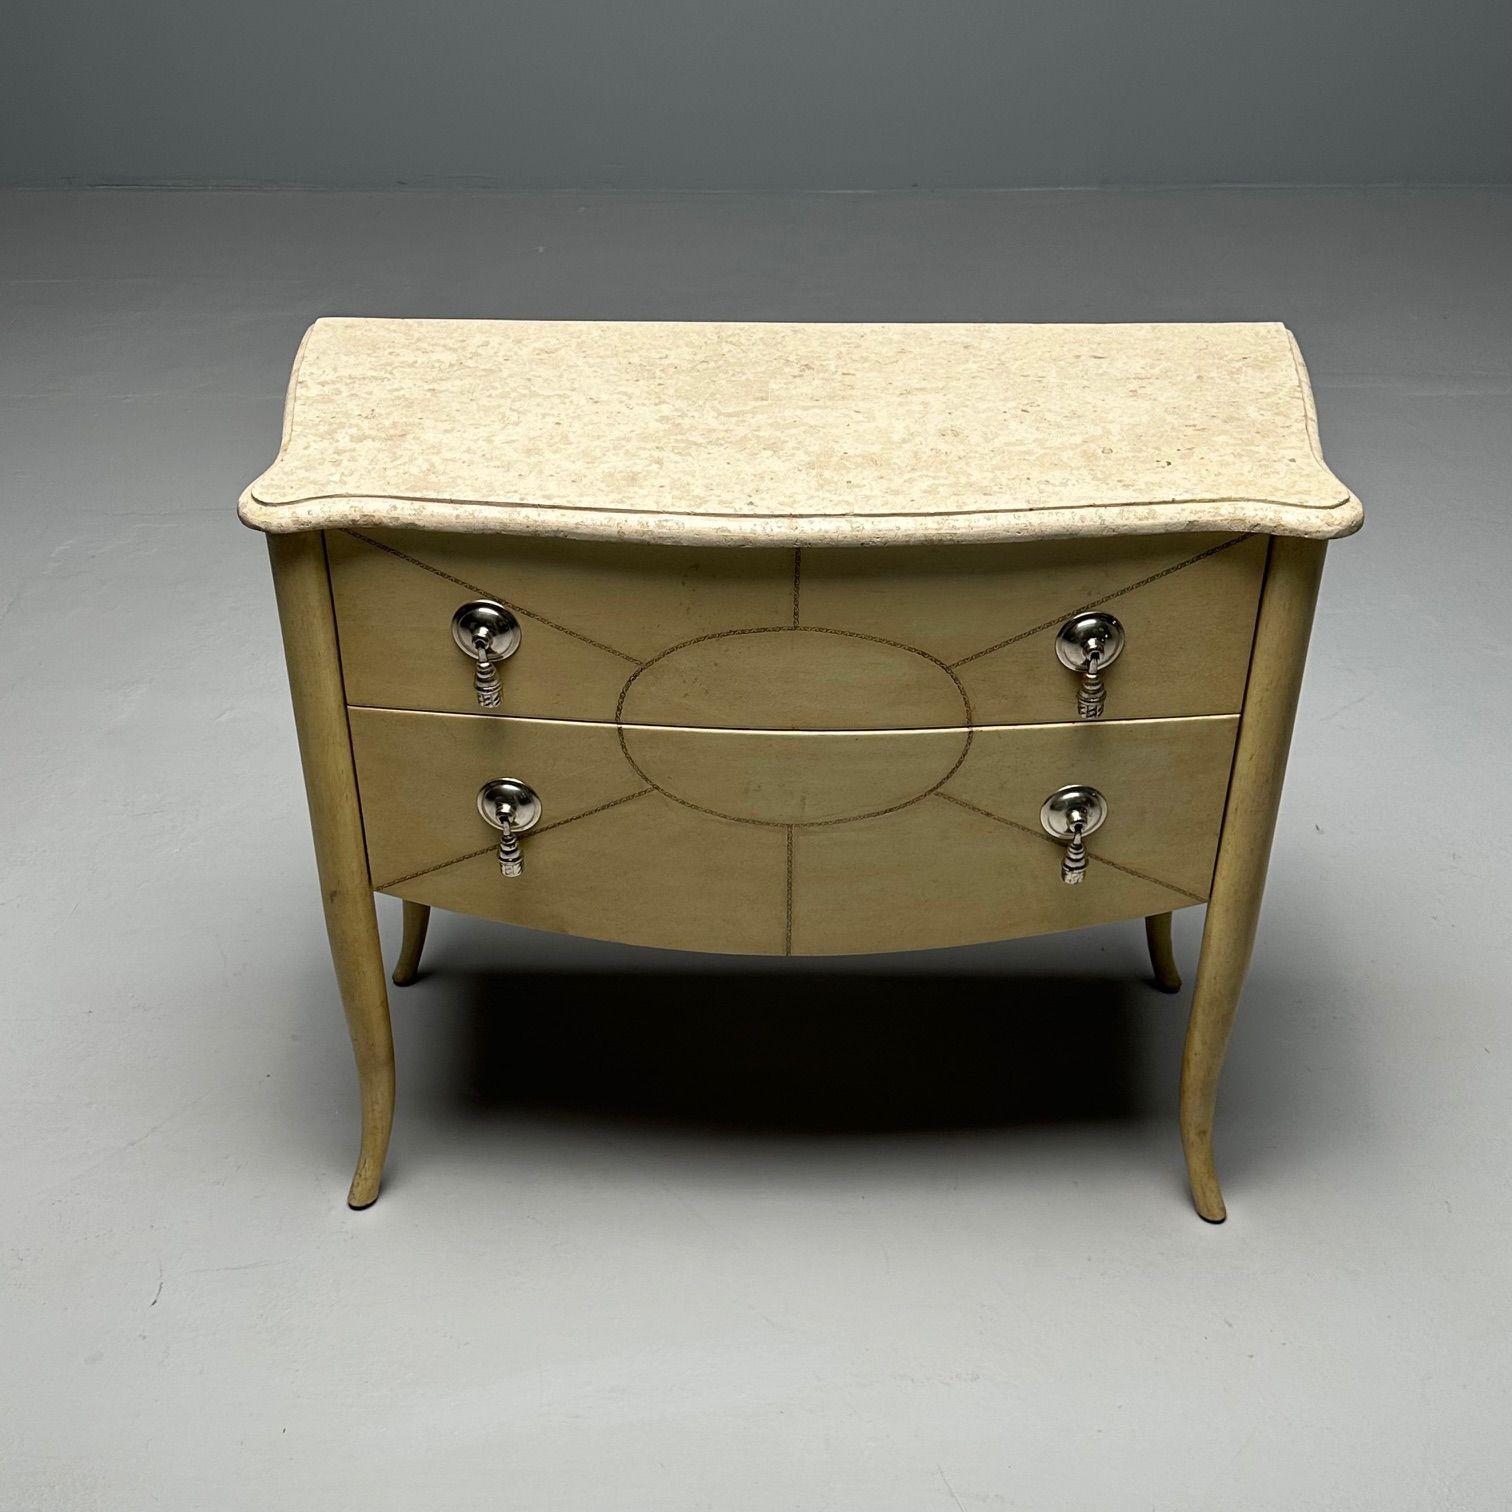 Andre Groult Style, Art Deco, Commodes, Beige Parchment Paper, Nickel, 1990s For Sale 5